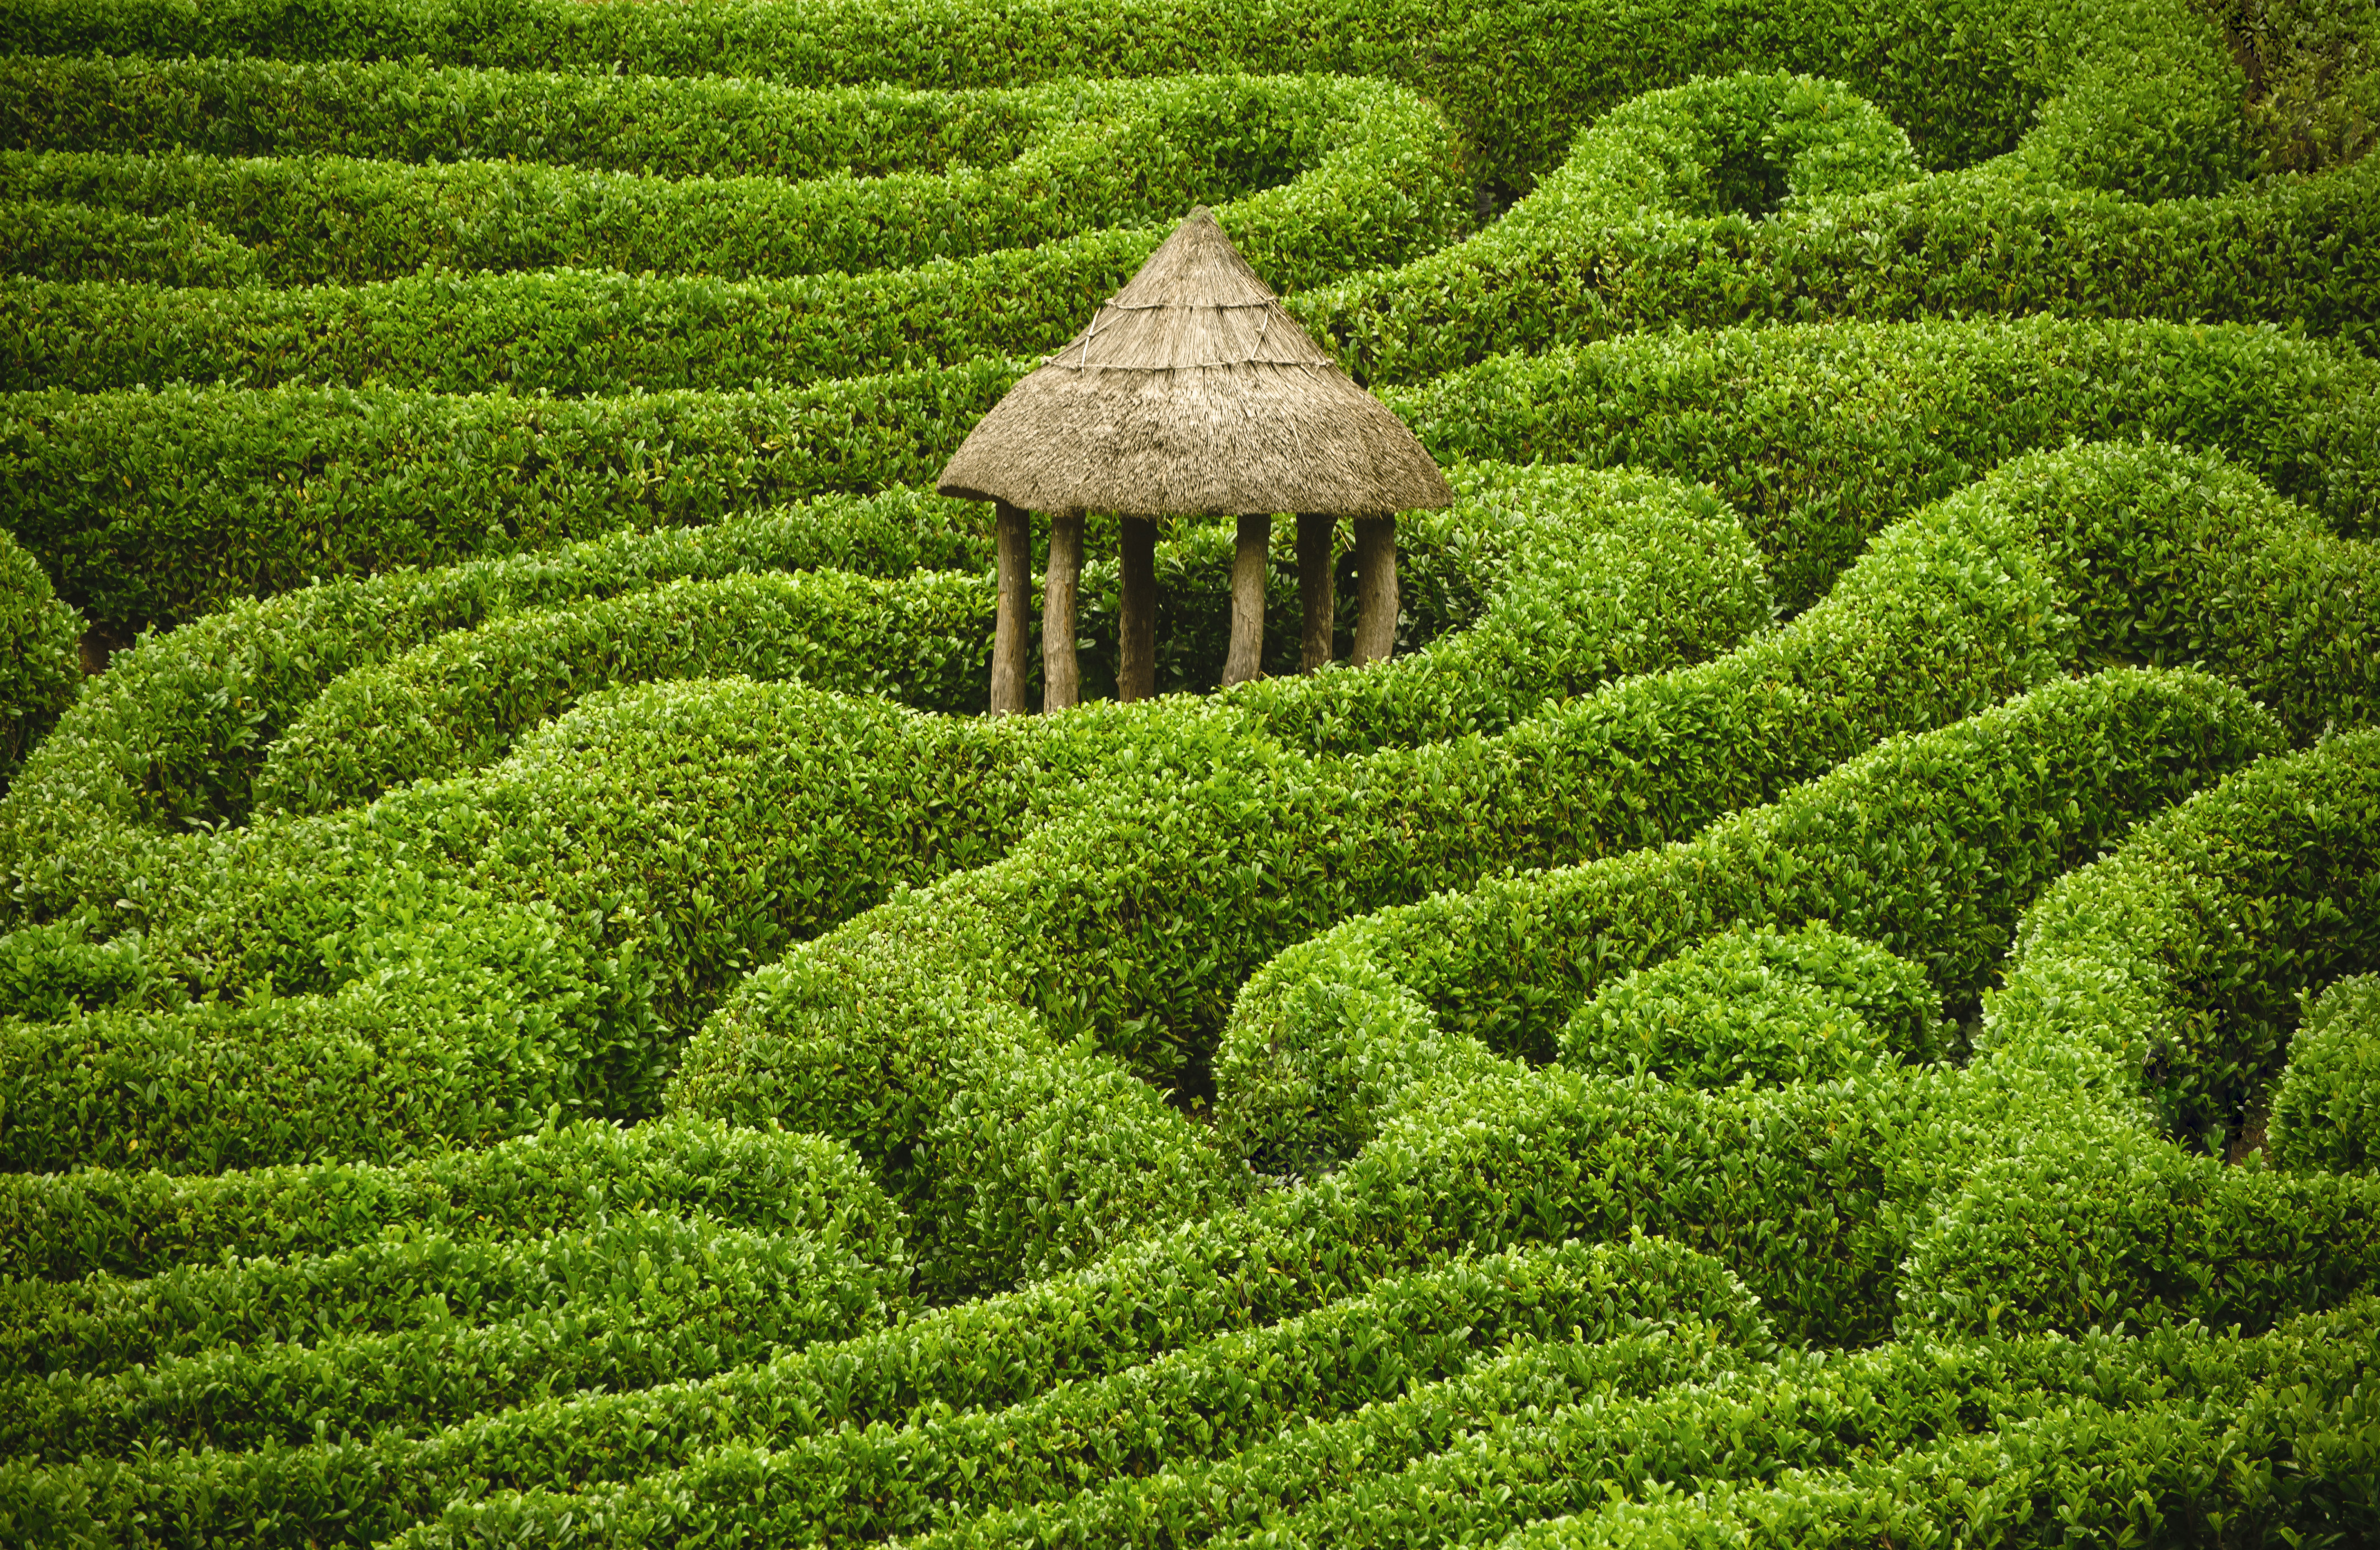 The top of a straw hut peeks out from a tangled maze of green hedges.